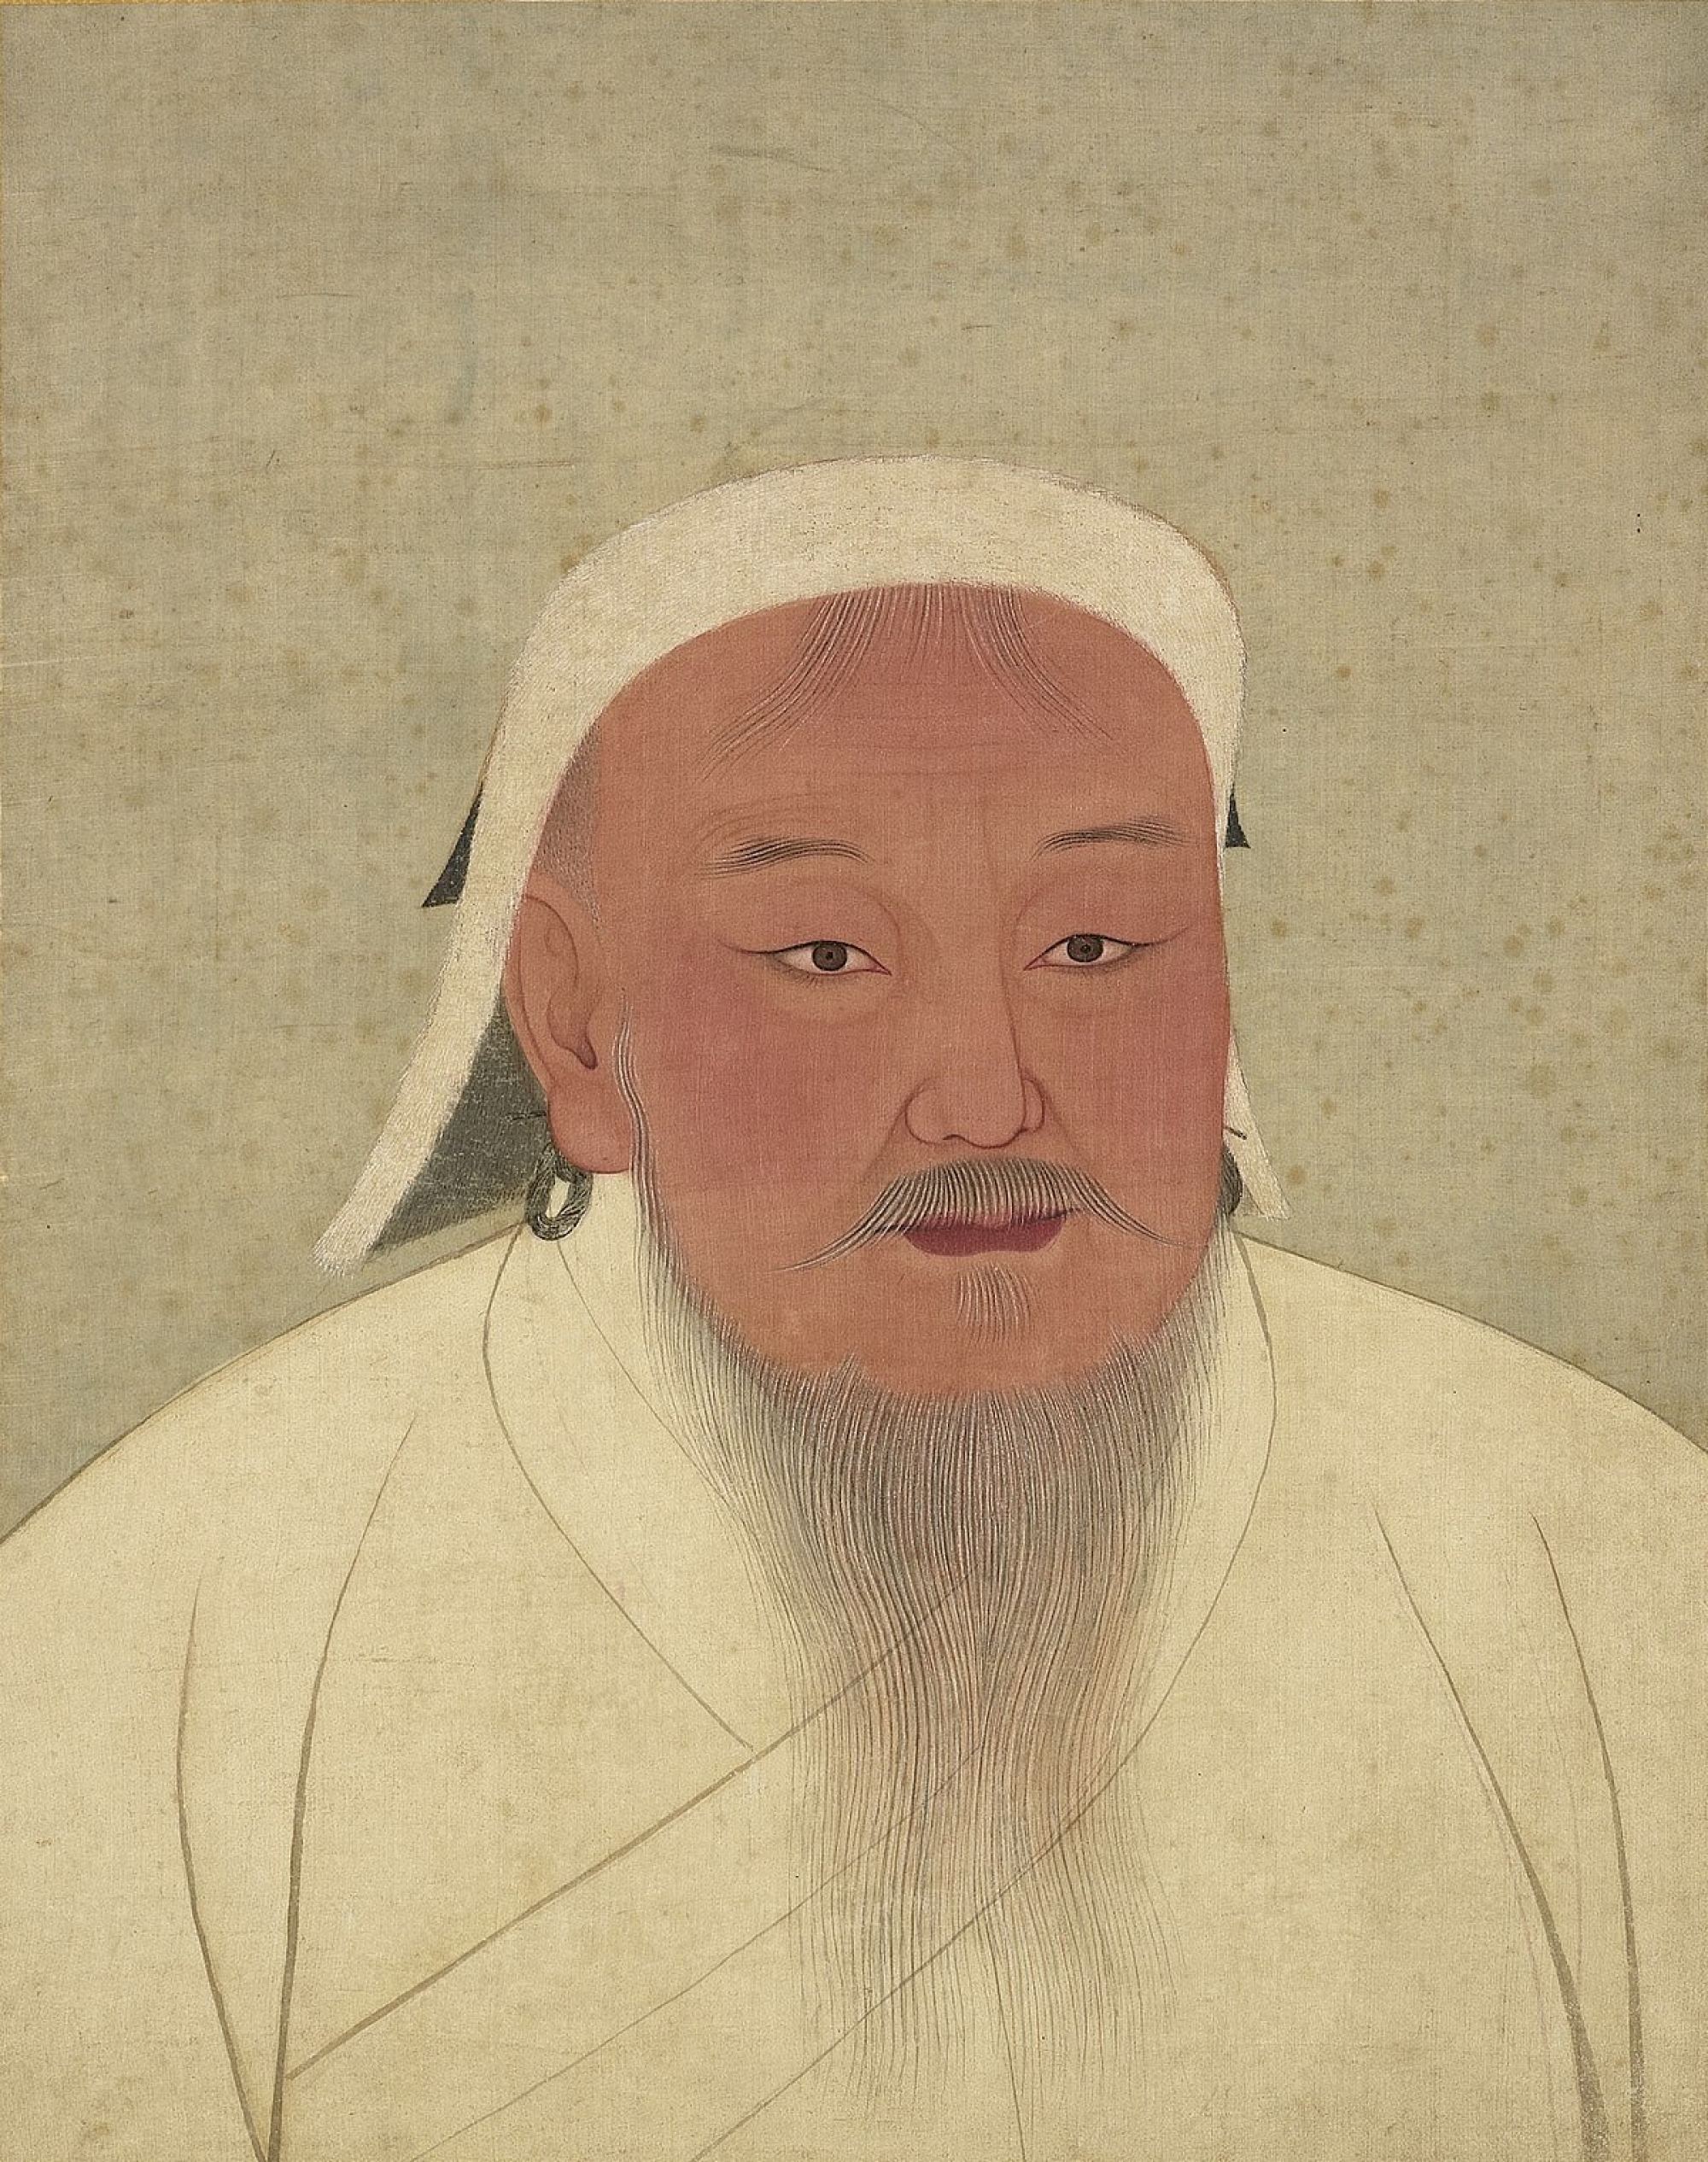 Mongol ruler Genghis Khan founded what would go on to become the largest contiguous empire in history. Photo: Wikipedia